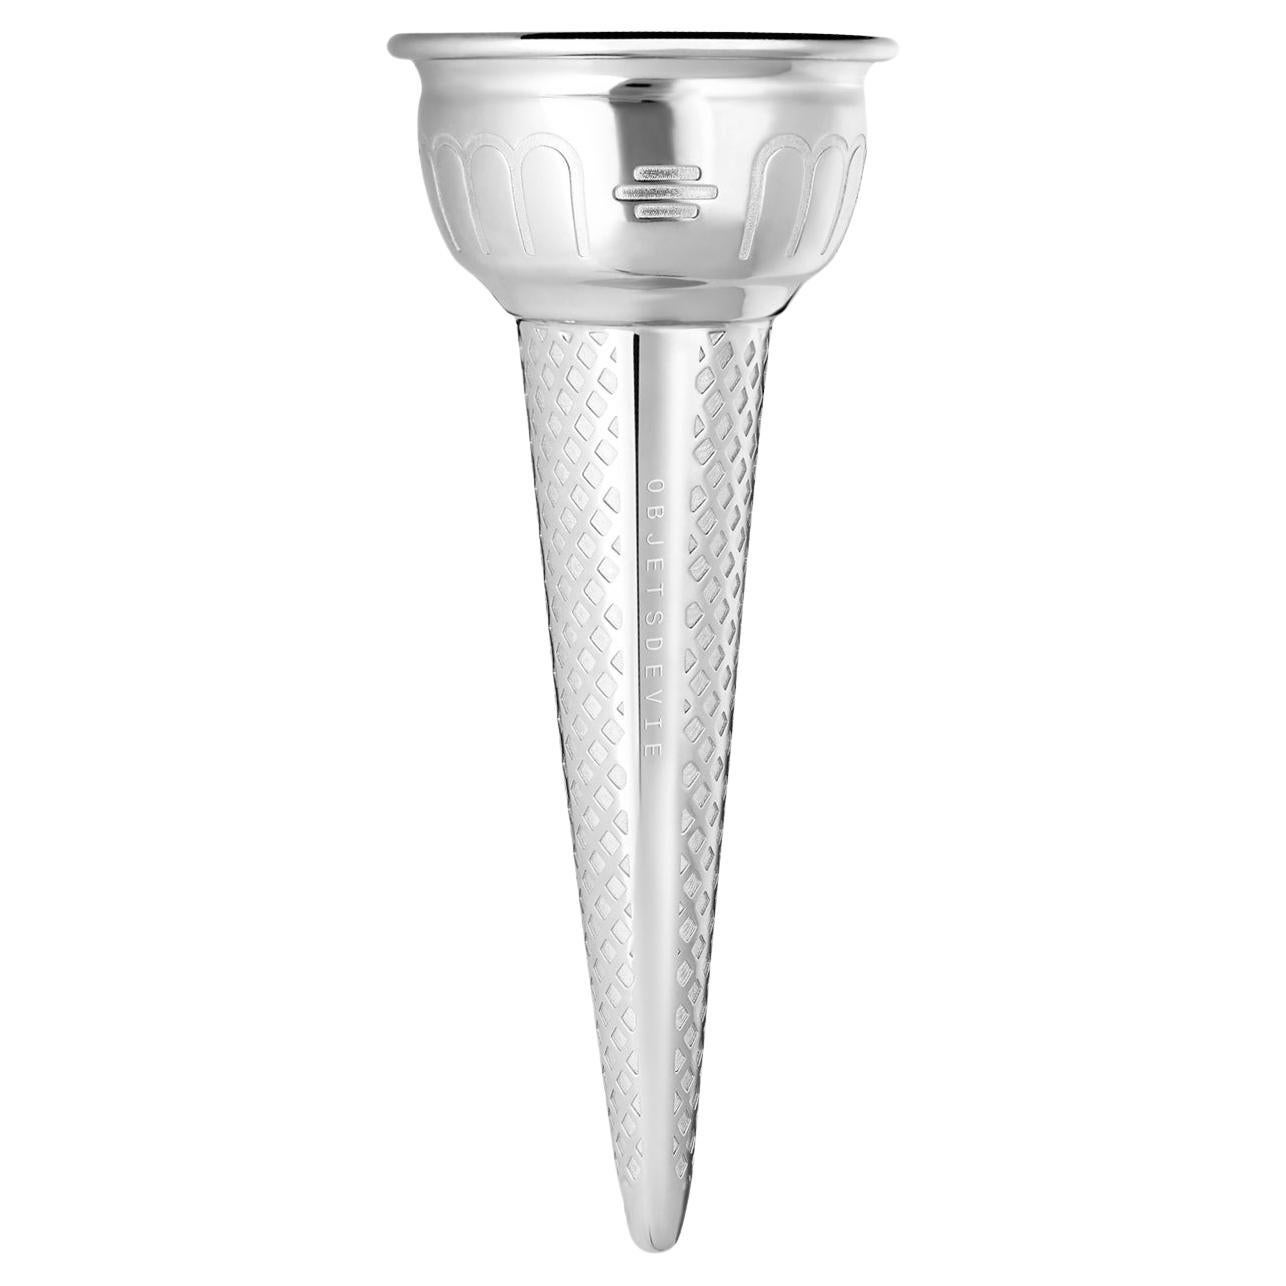 The Cono 925 is an engraved, antibacterial sterling silver ice cream cone: a nostalgic object reminiscent of summer holidays rendered precious and everlasting.